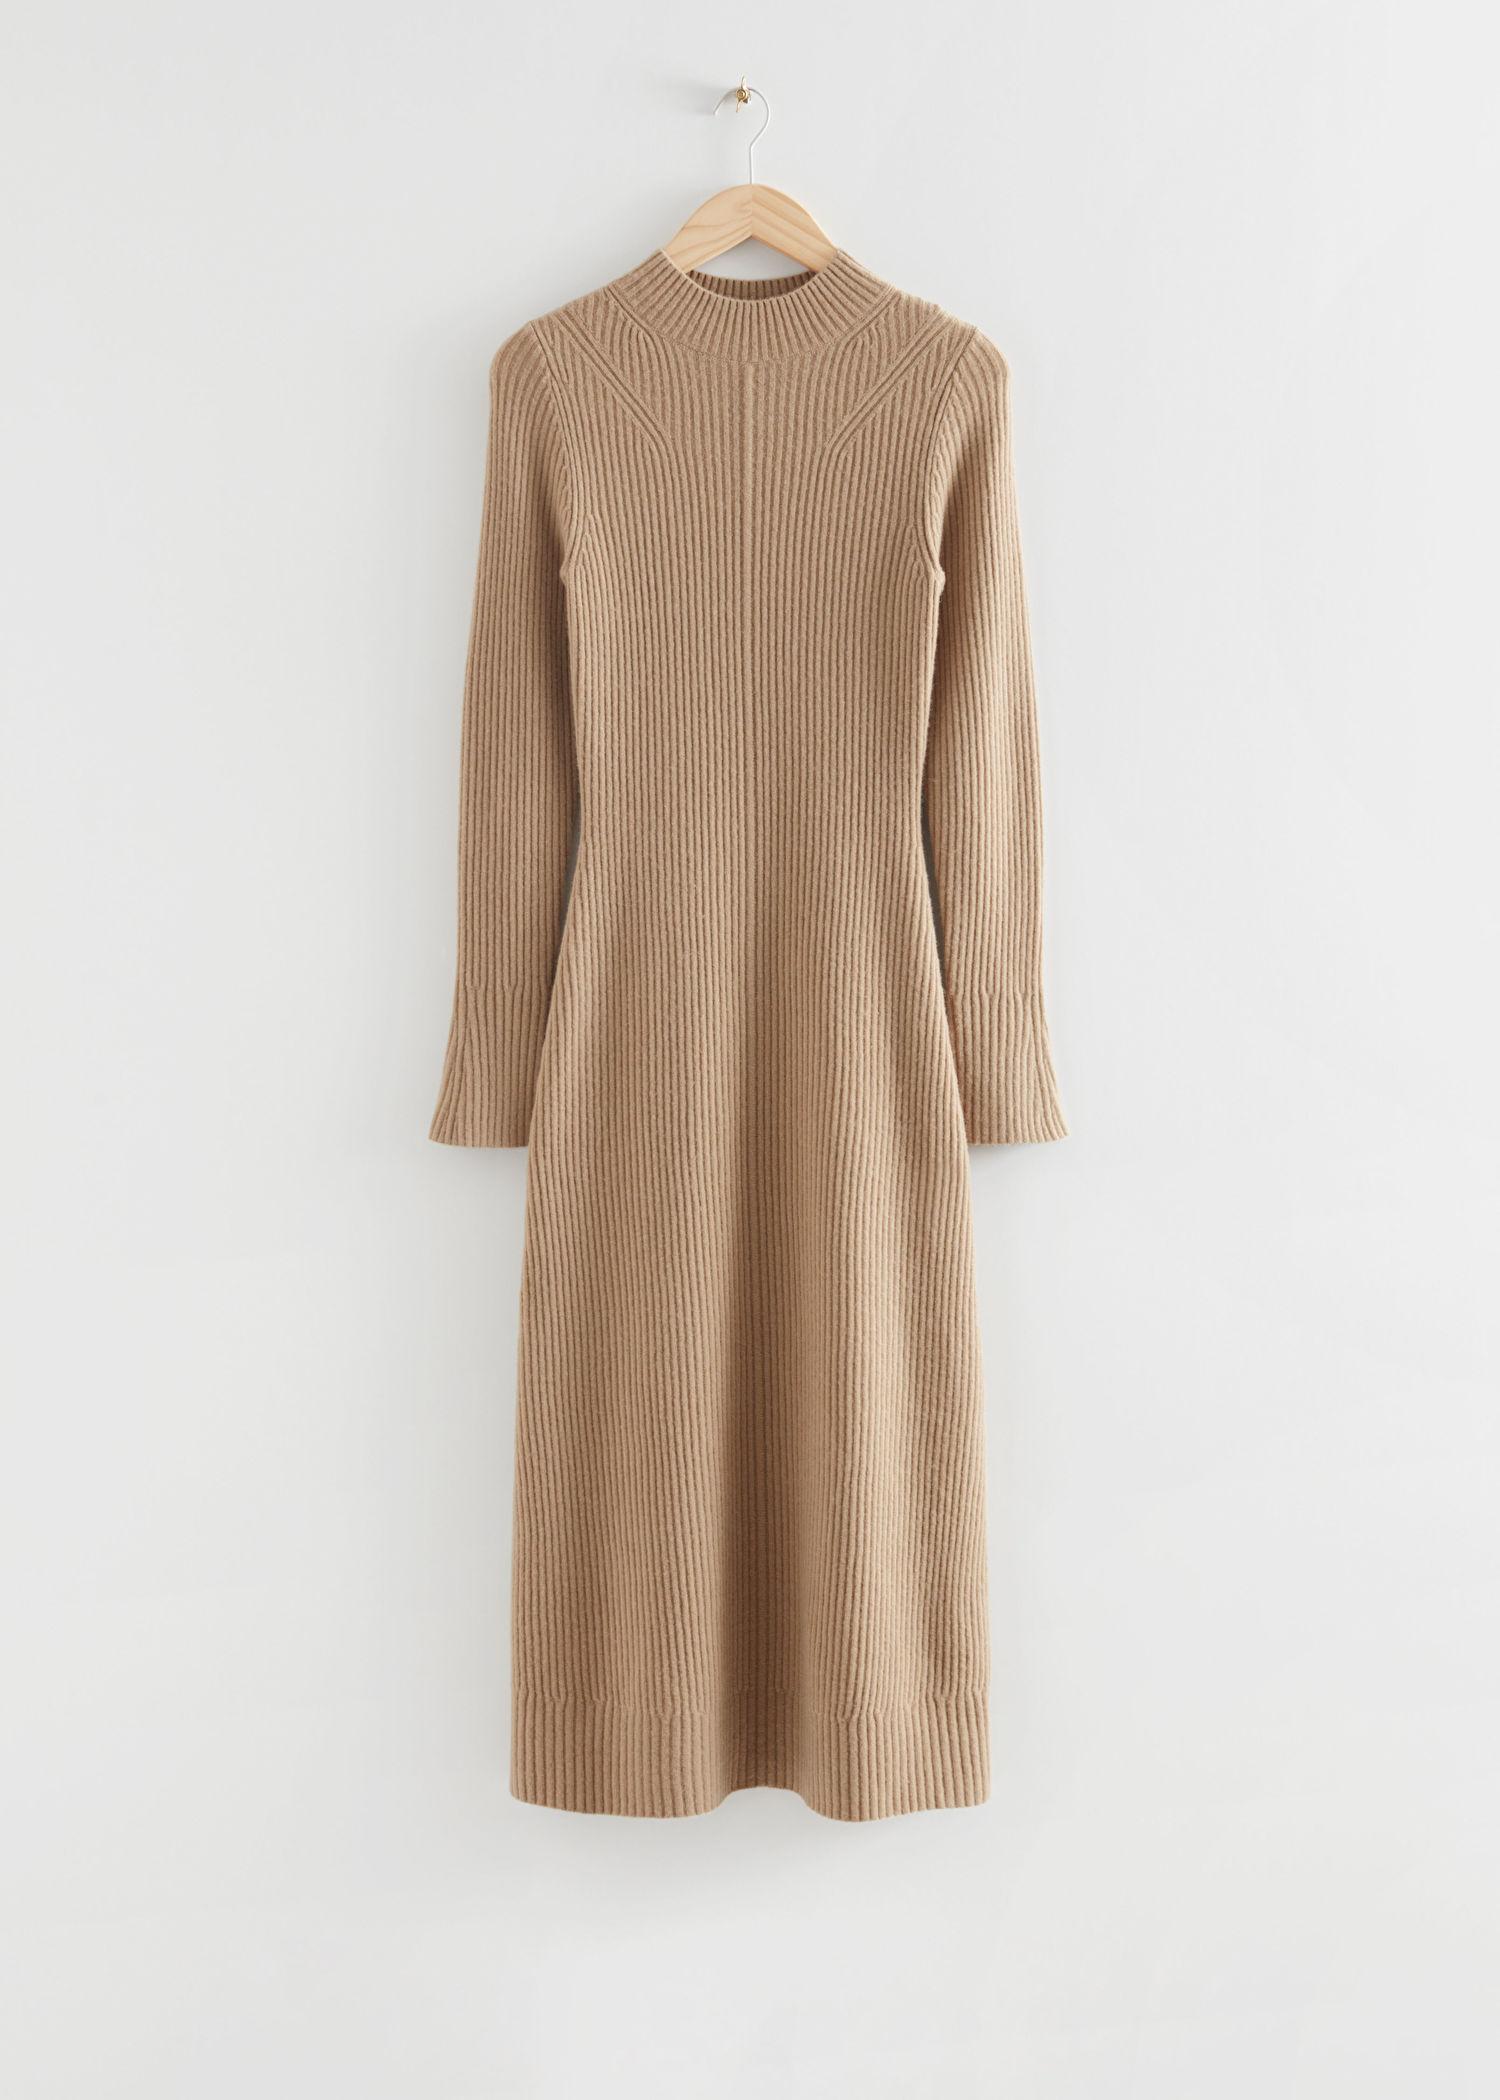 & Other Stories Fitted A-line Wool Knit Dress in Natural | Lyst Canada